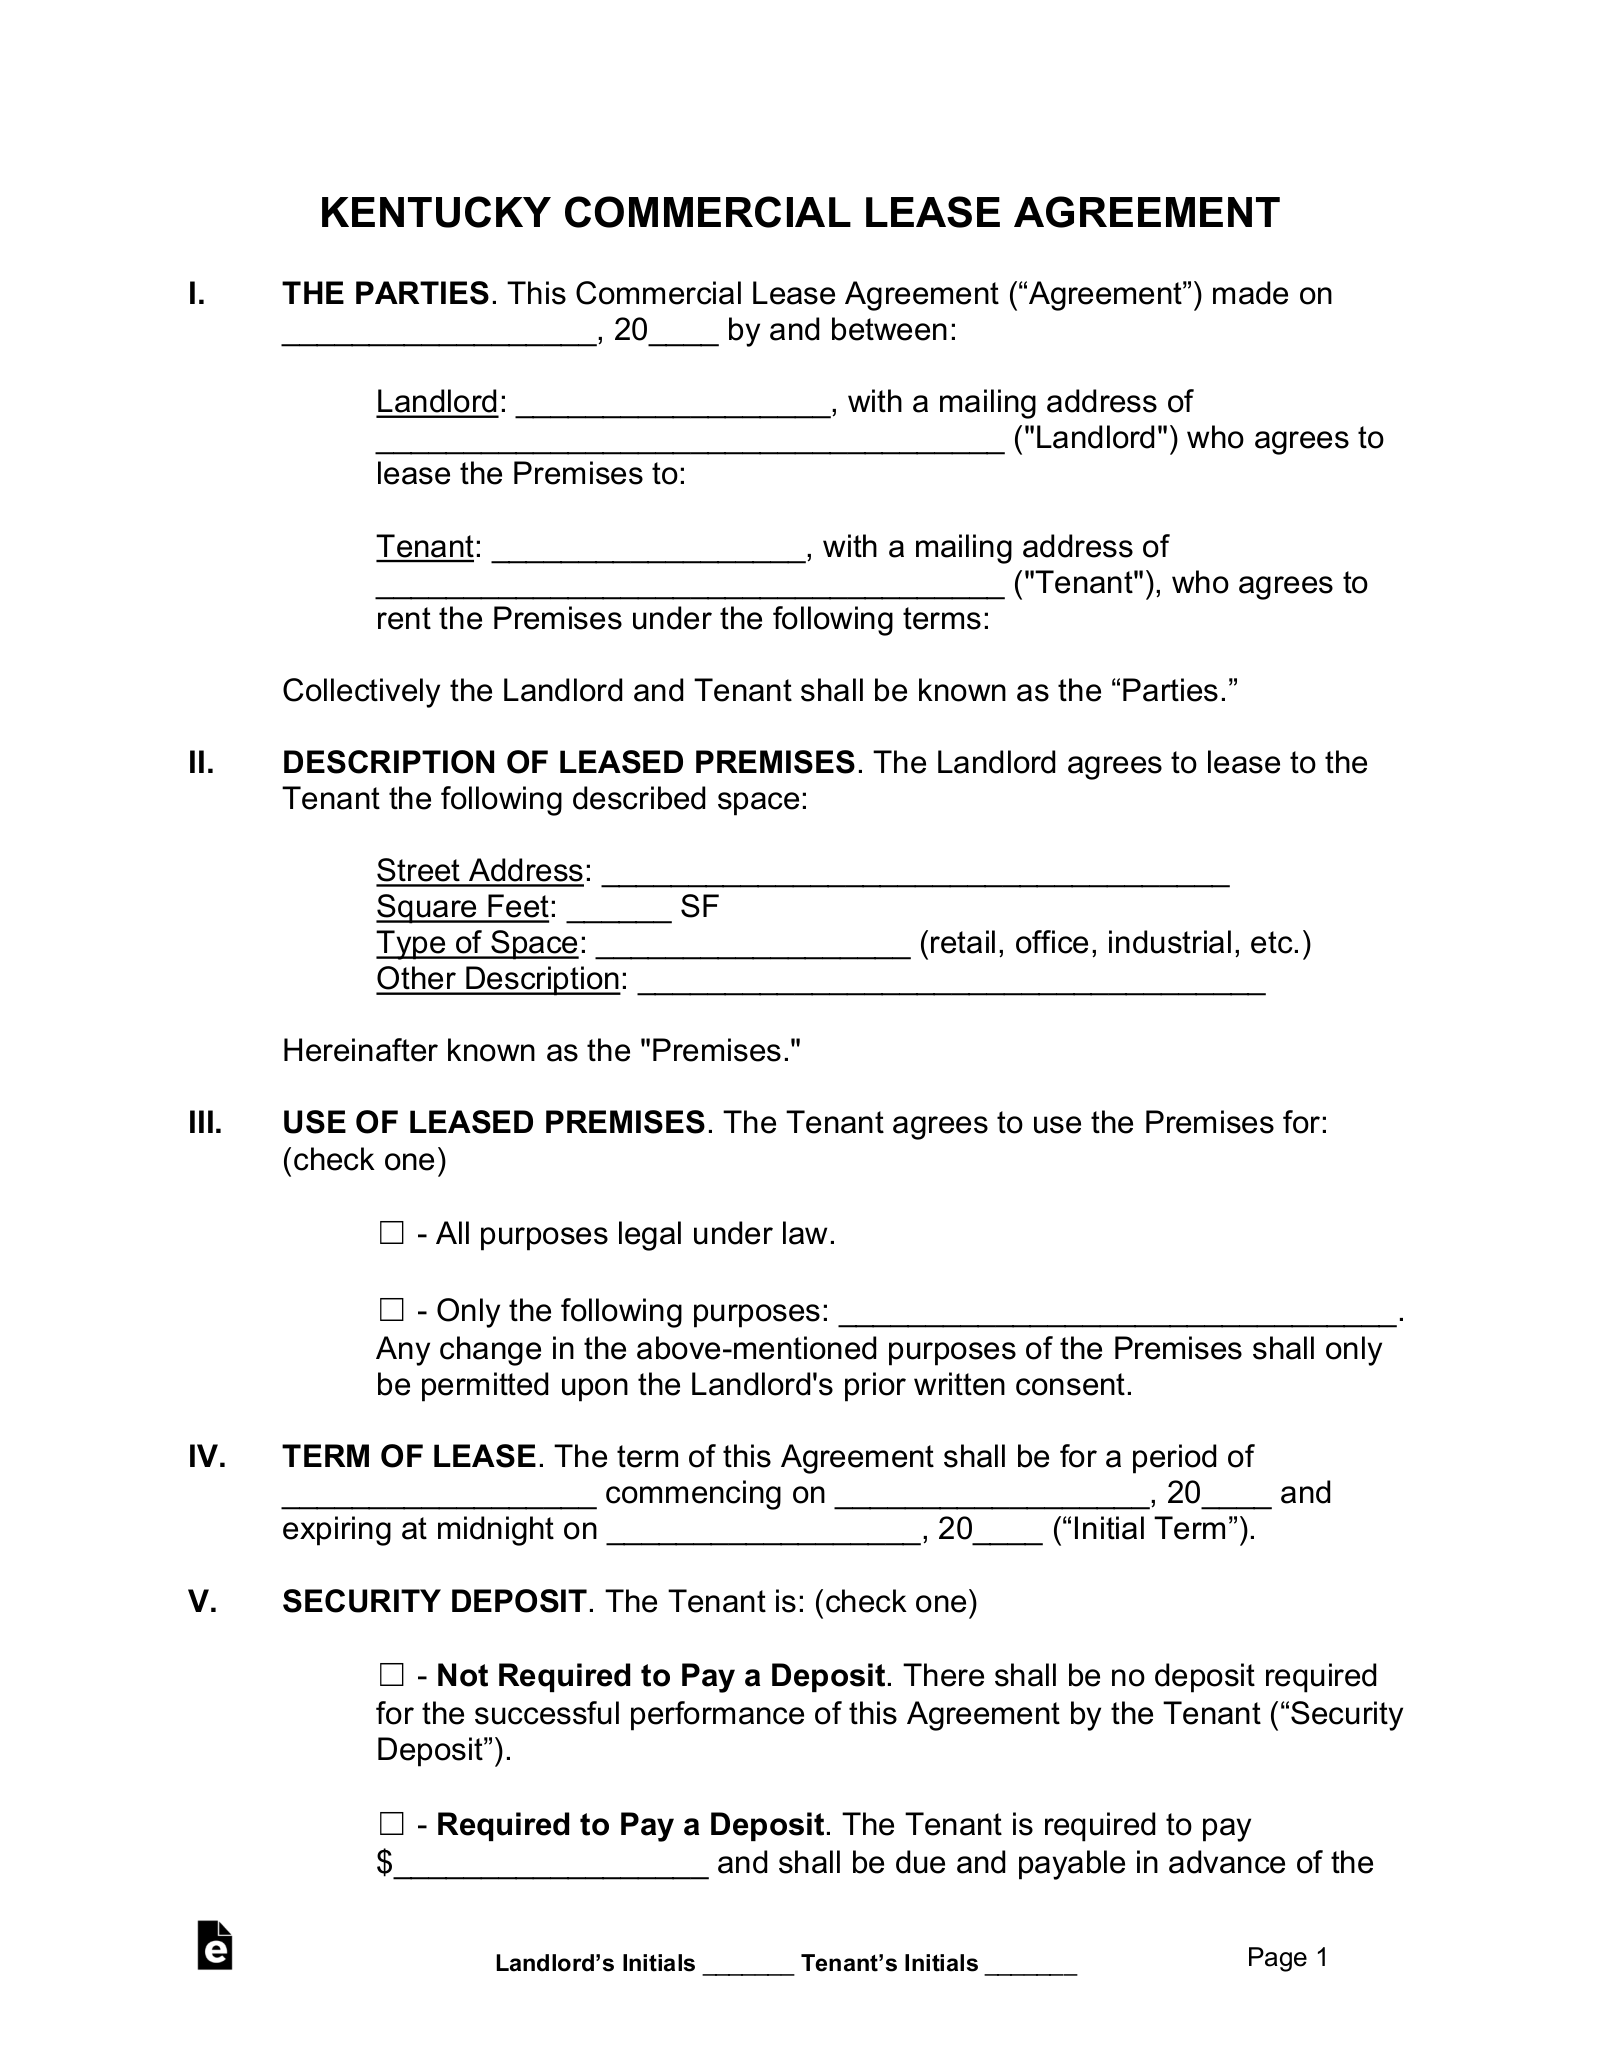 Kentucky Commercial Lease Agreement Template